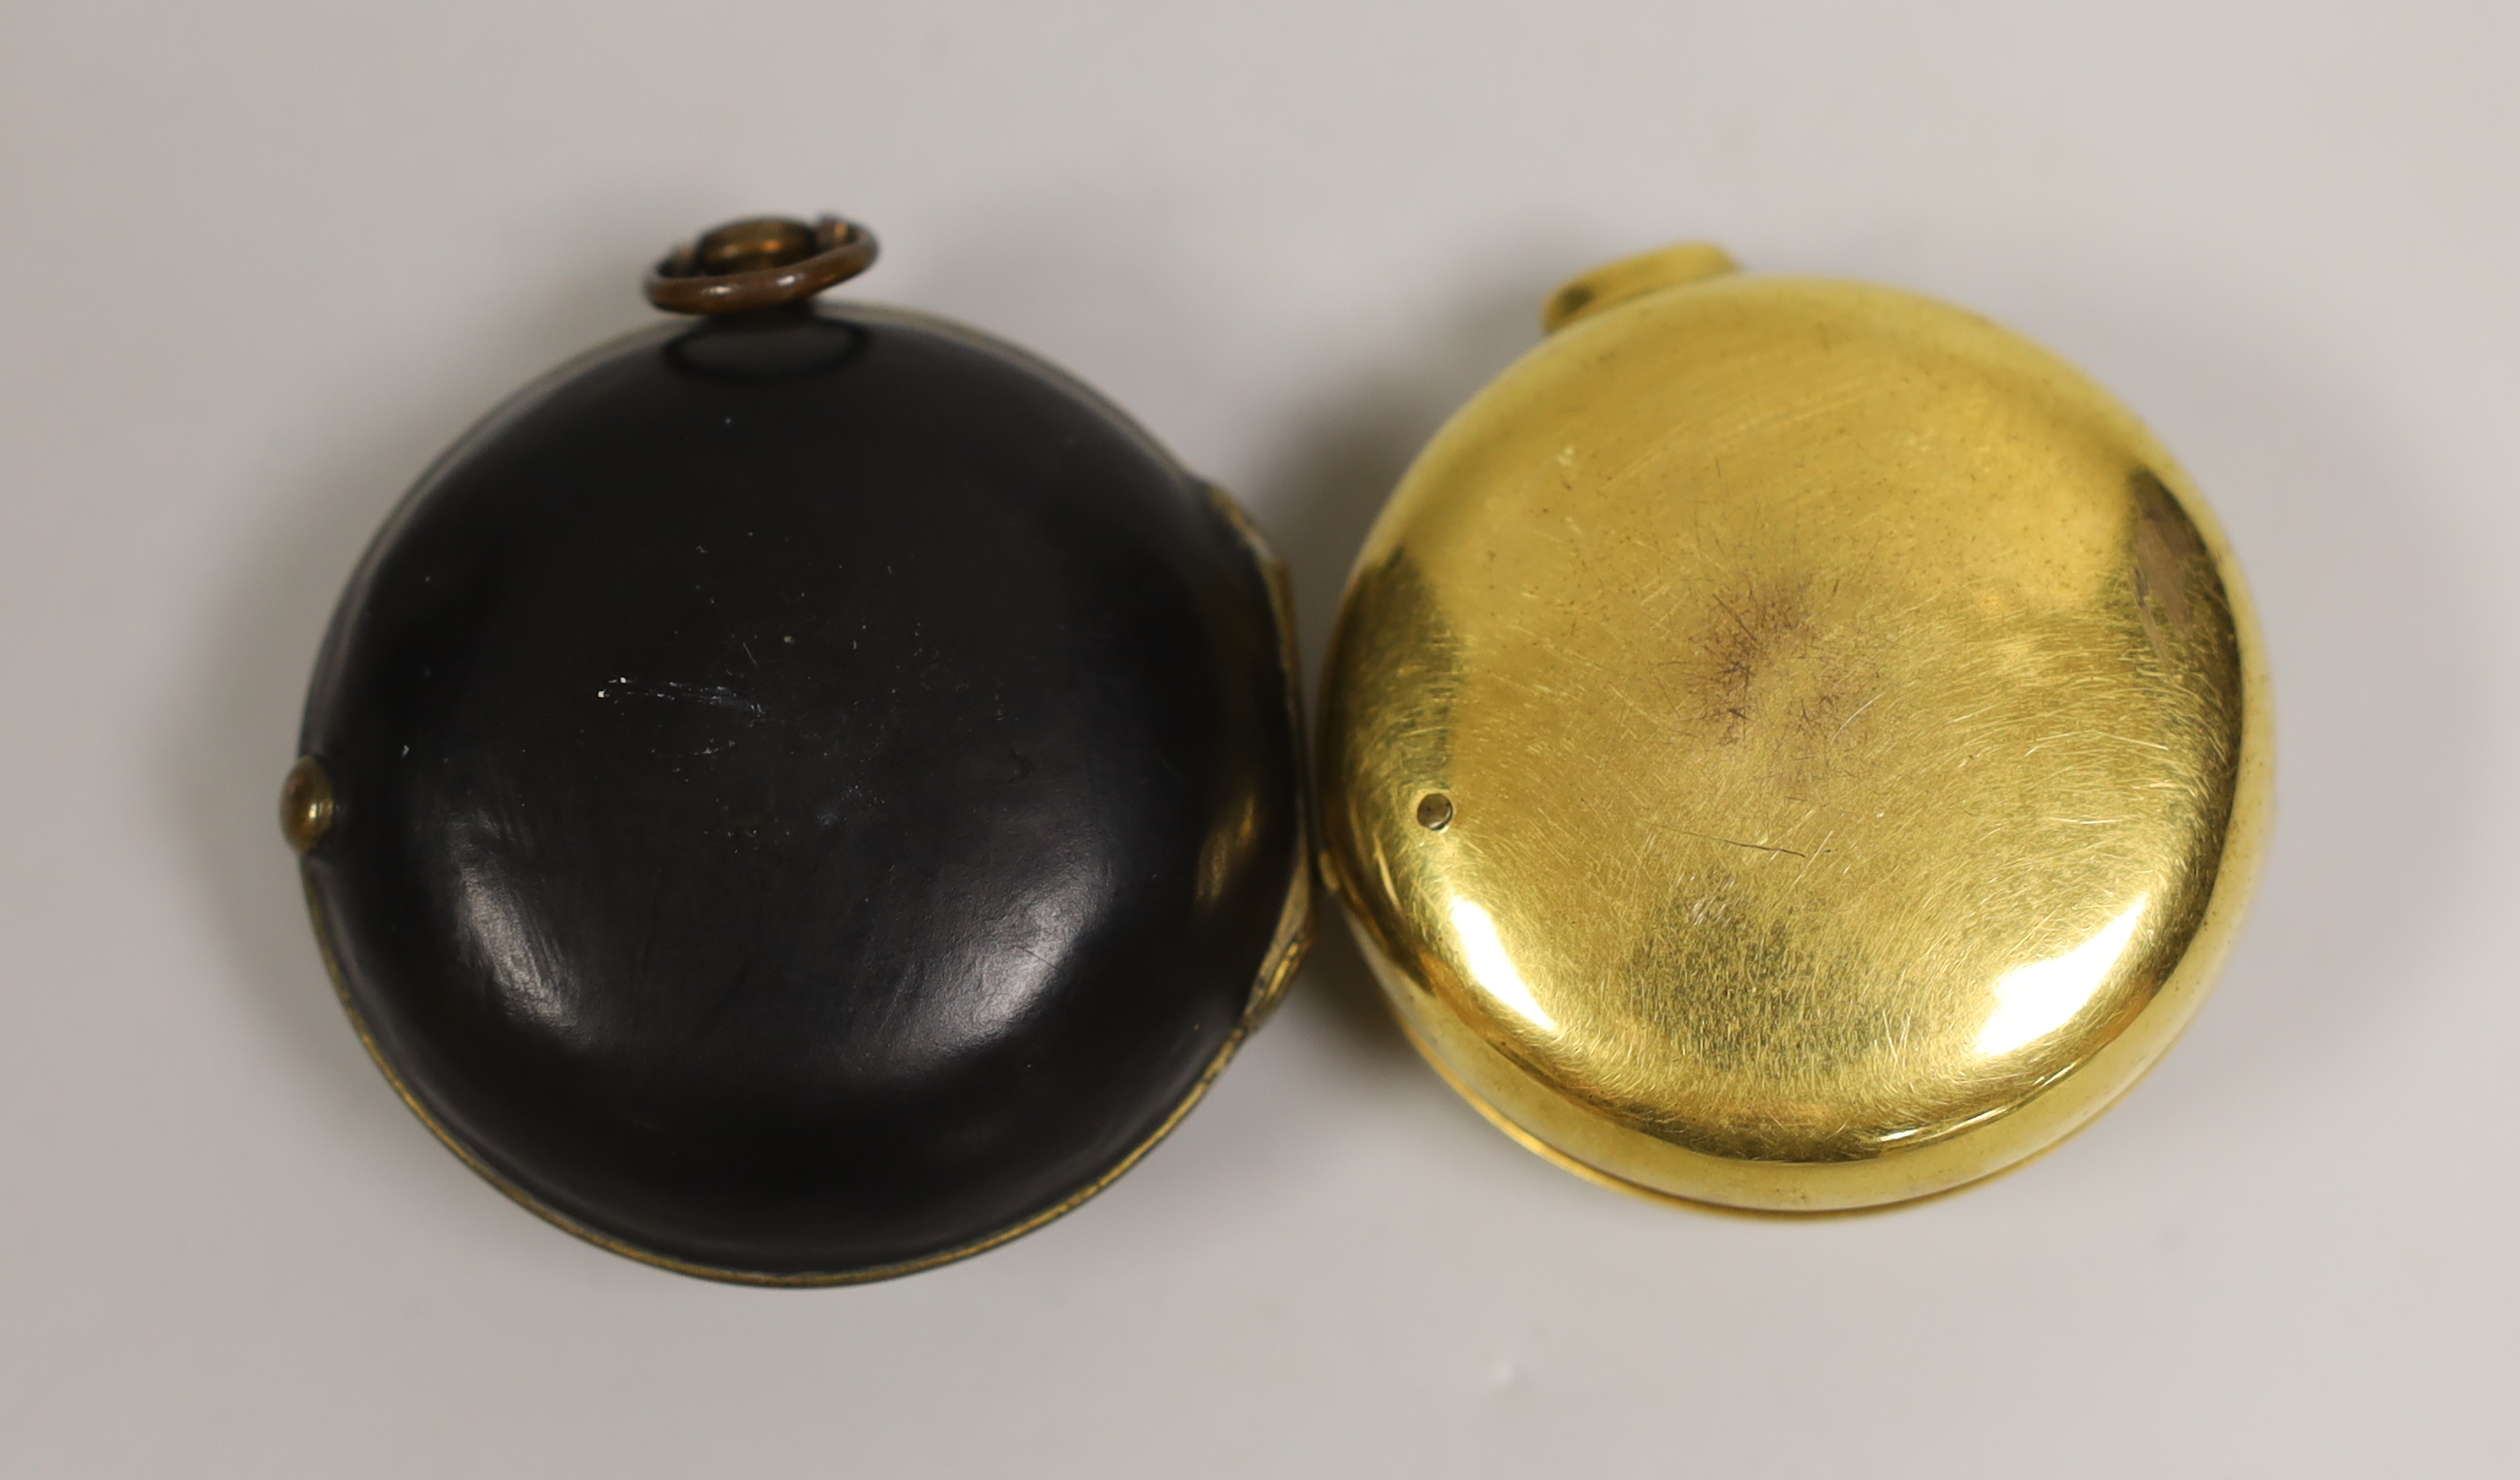 An 18th century gilt metal pair cased keywind verge pocket watch, by Frank Upjohn of London (a.f.) and a similar pocket watch by J. Edmond of Liverpool.